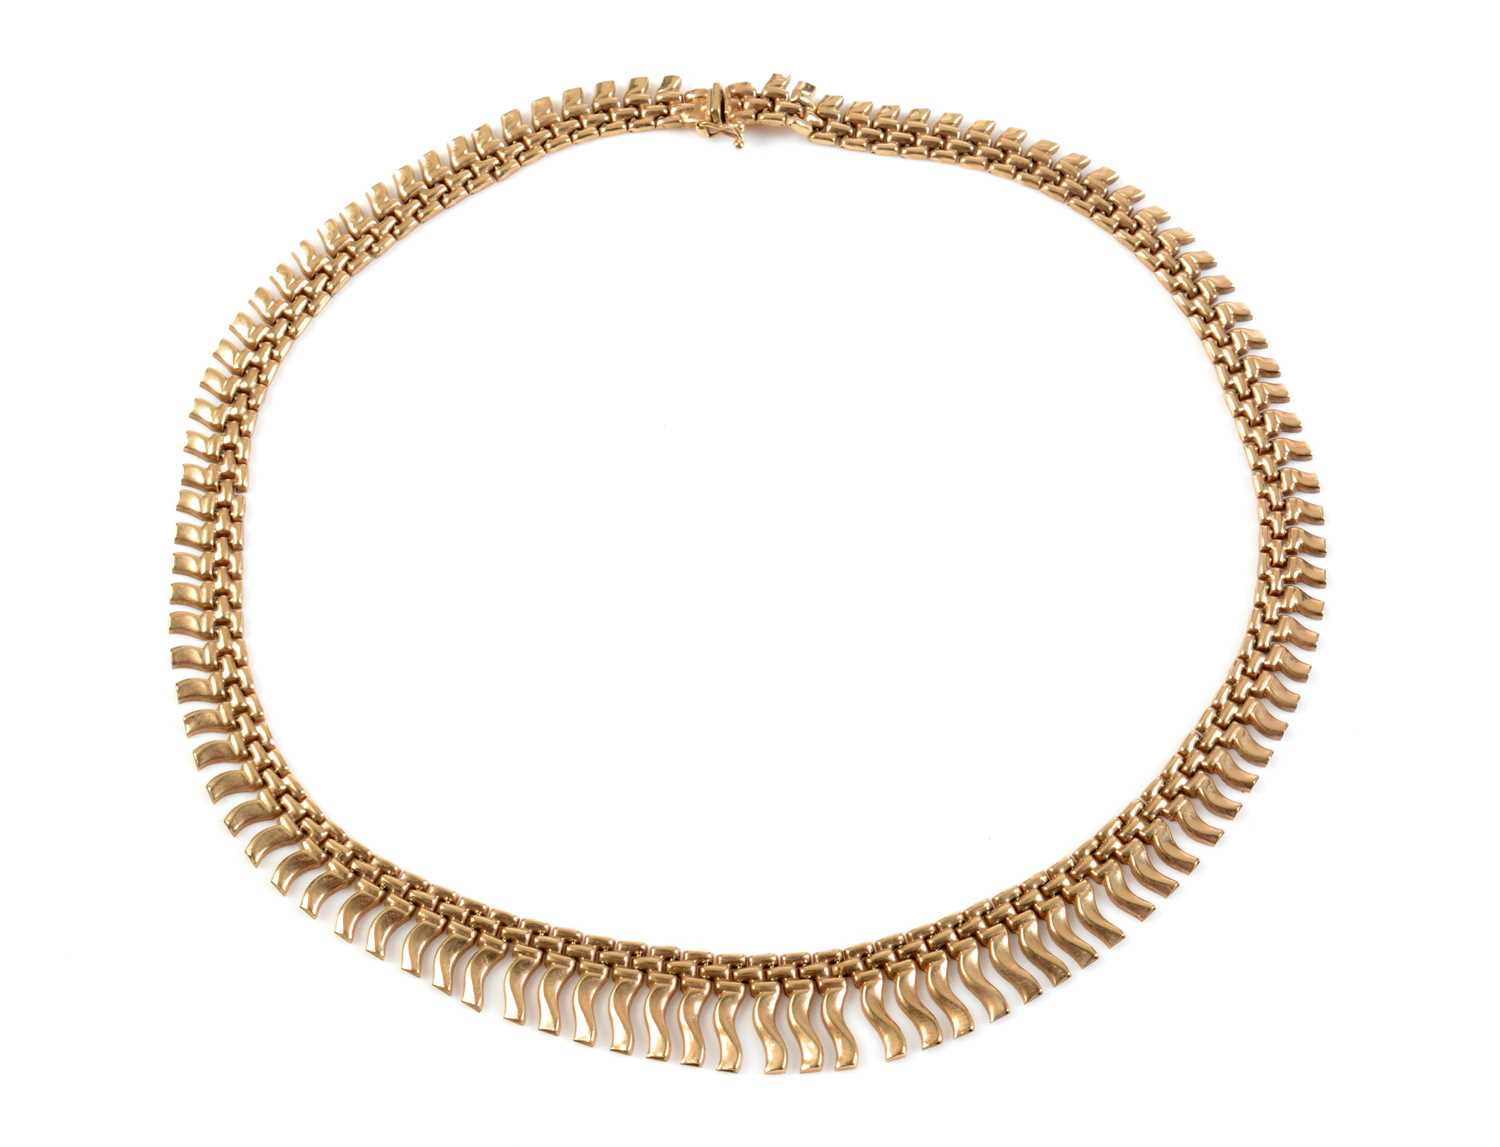 Lot 17 - A 9ct yellow gold fringe necklace